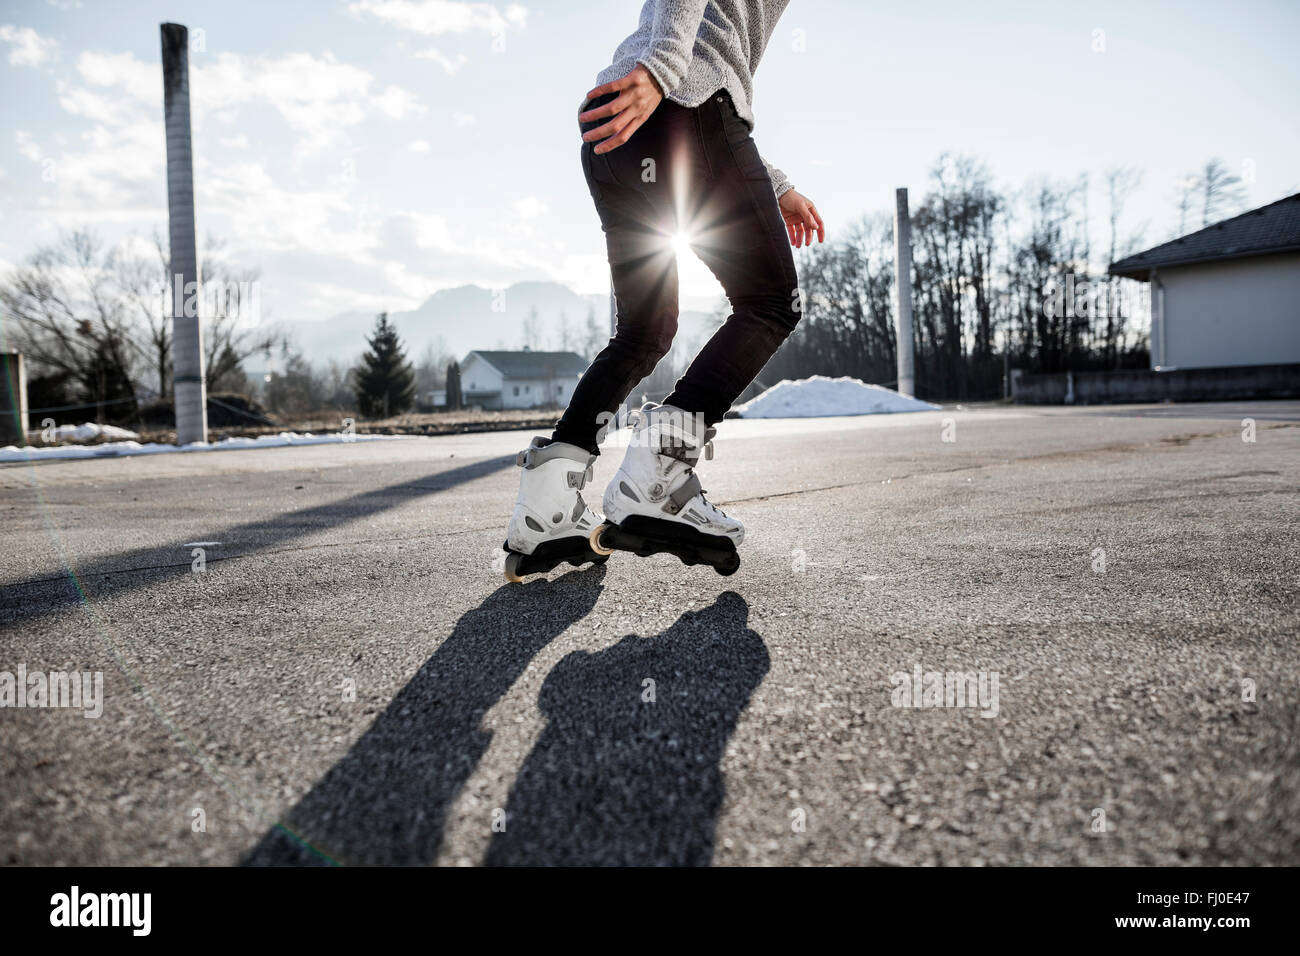 Low section of young man inline skating Stock Photo